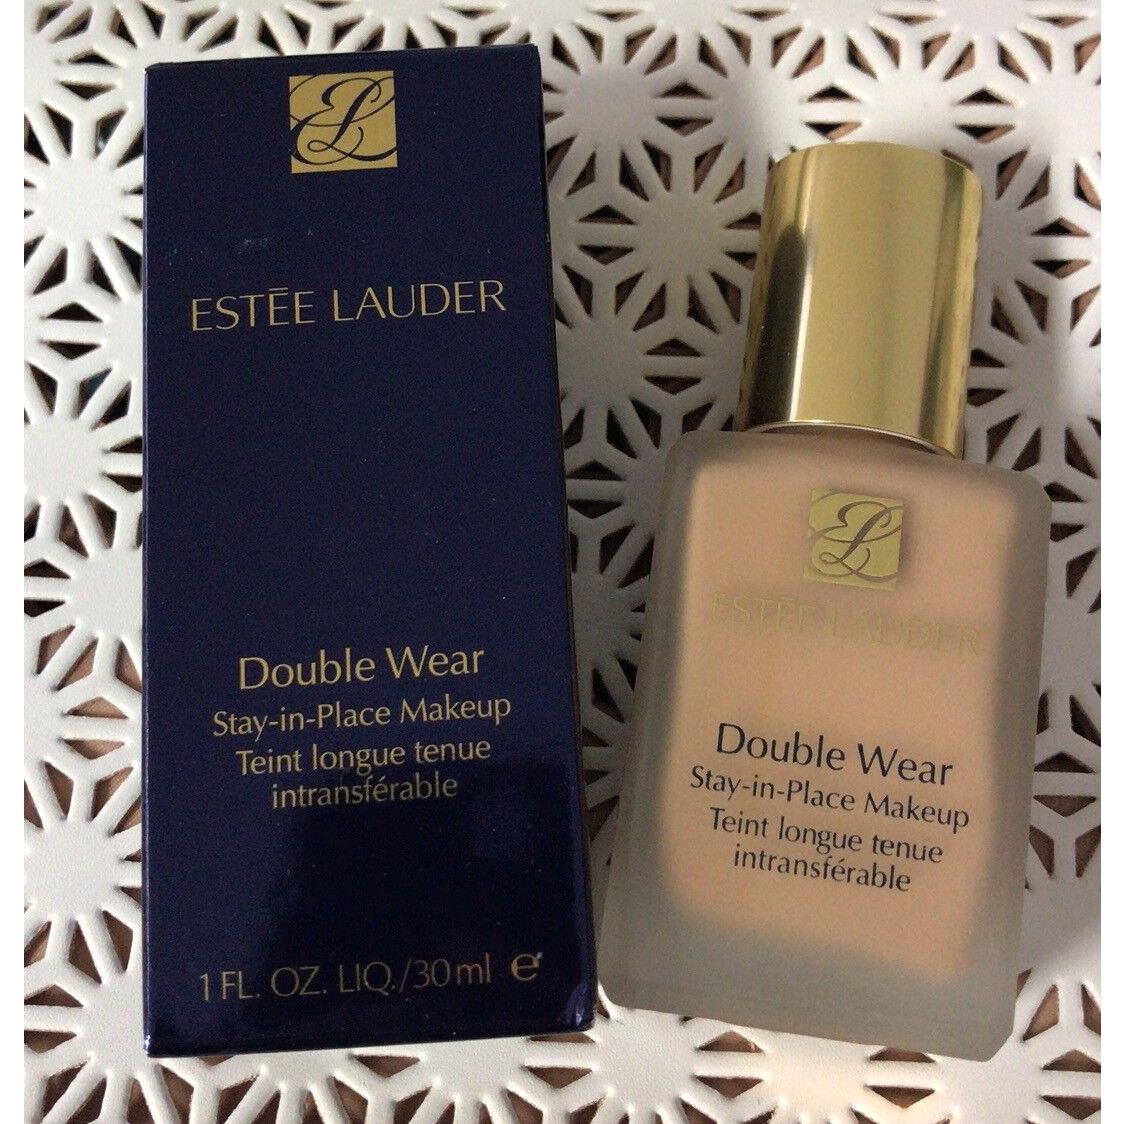 Set Full Size Estee Lauder Double Wear Stay-in-place Makeup Shade: 1C1 Cool Bone